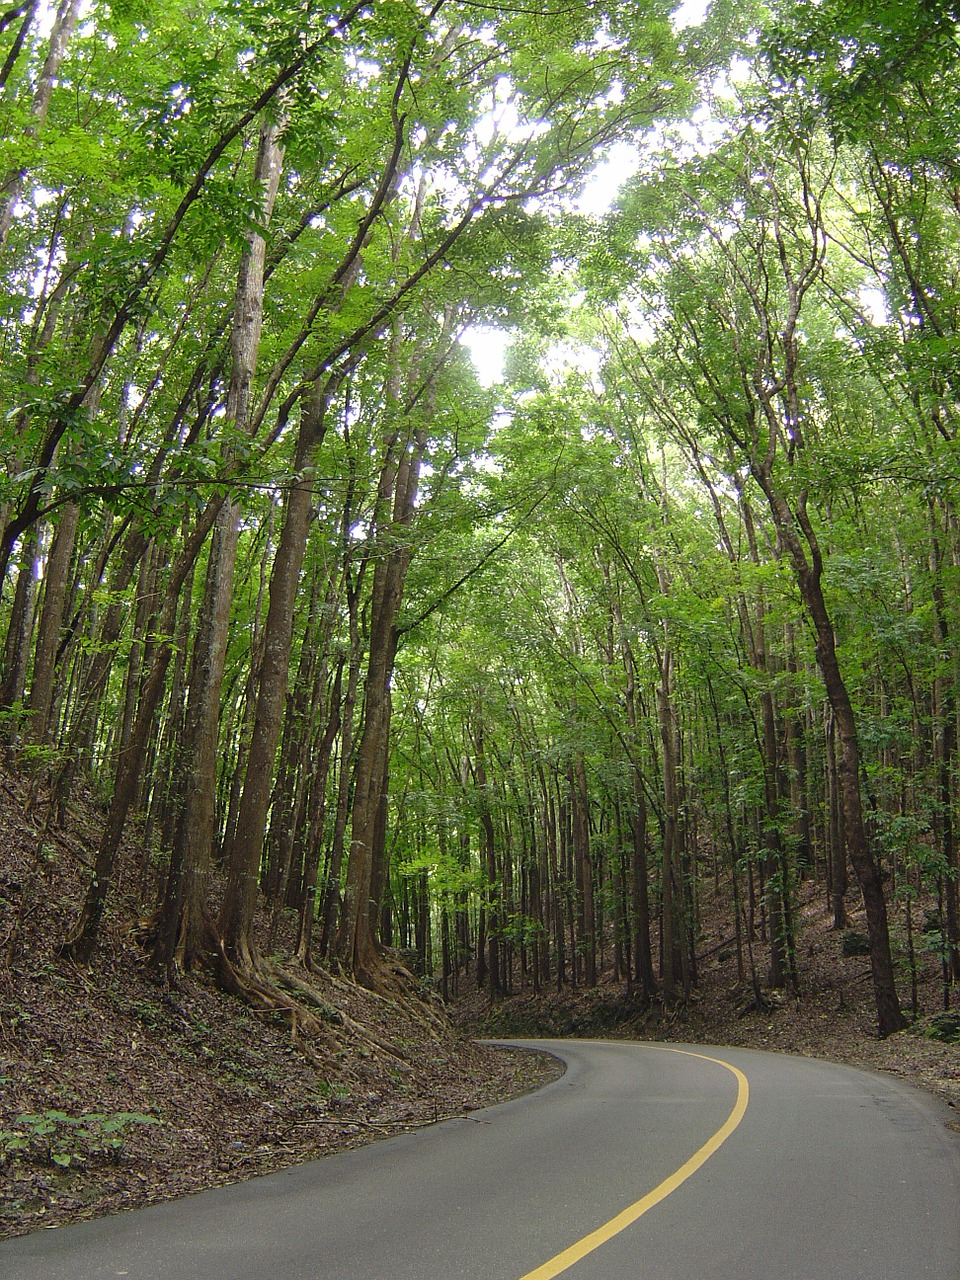 man-made forest bohol philippines free photo